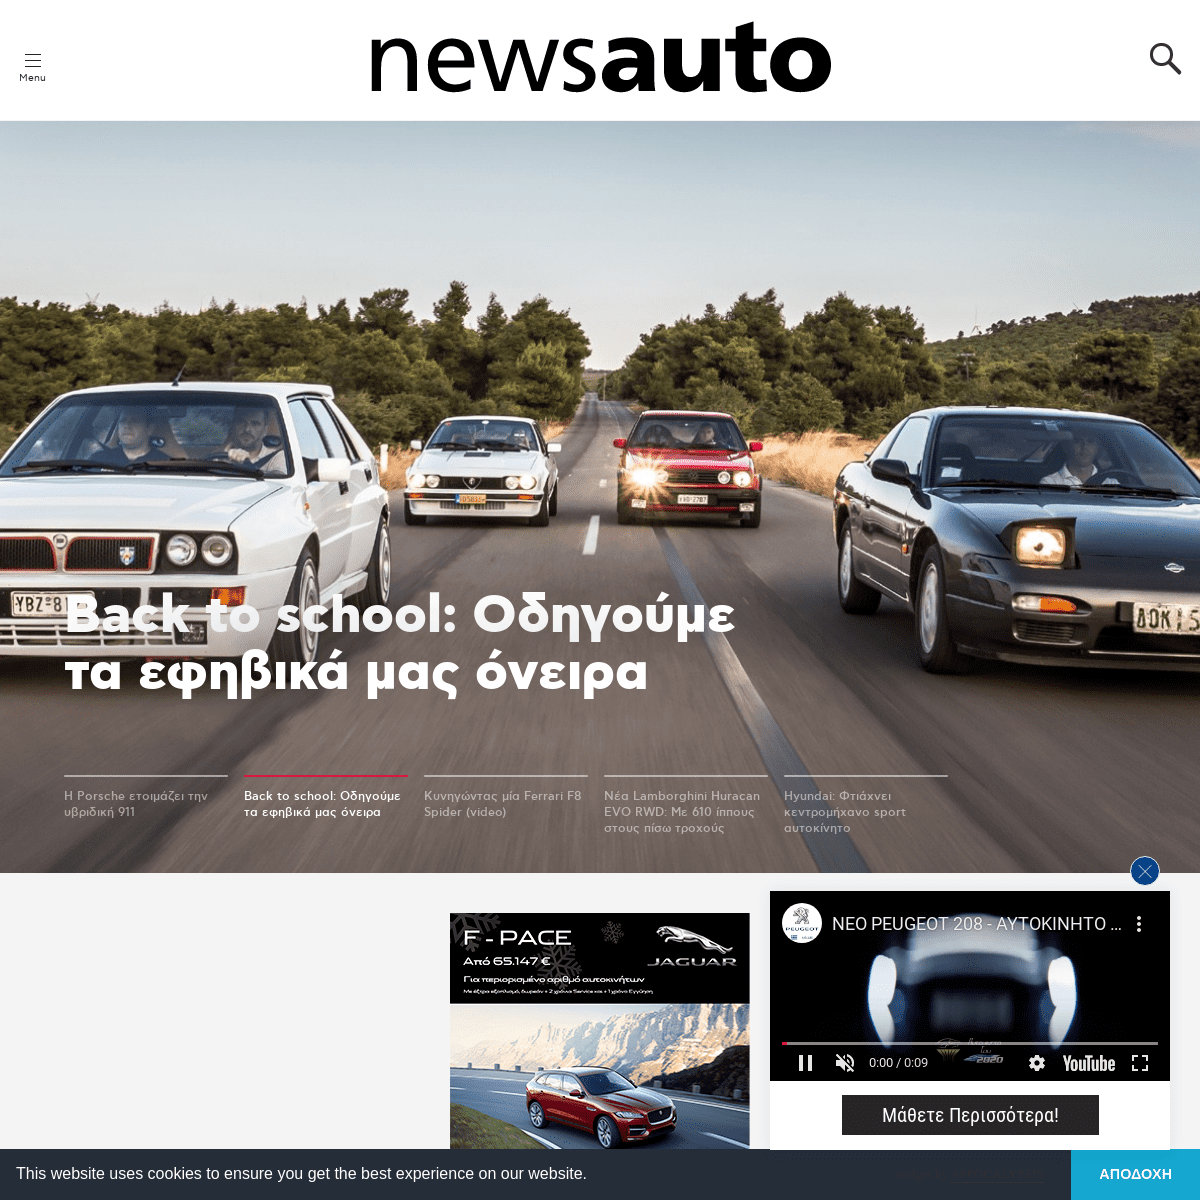 A complete backup of newsauto.gr